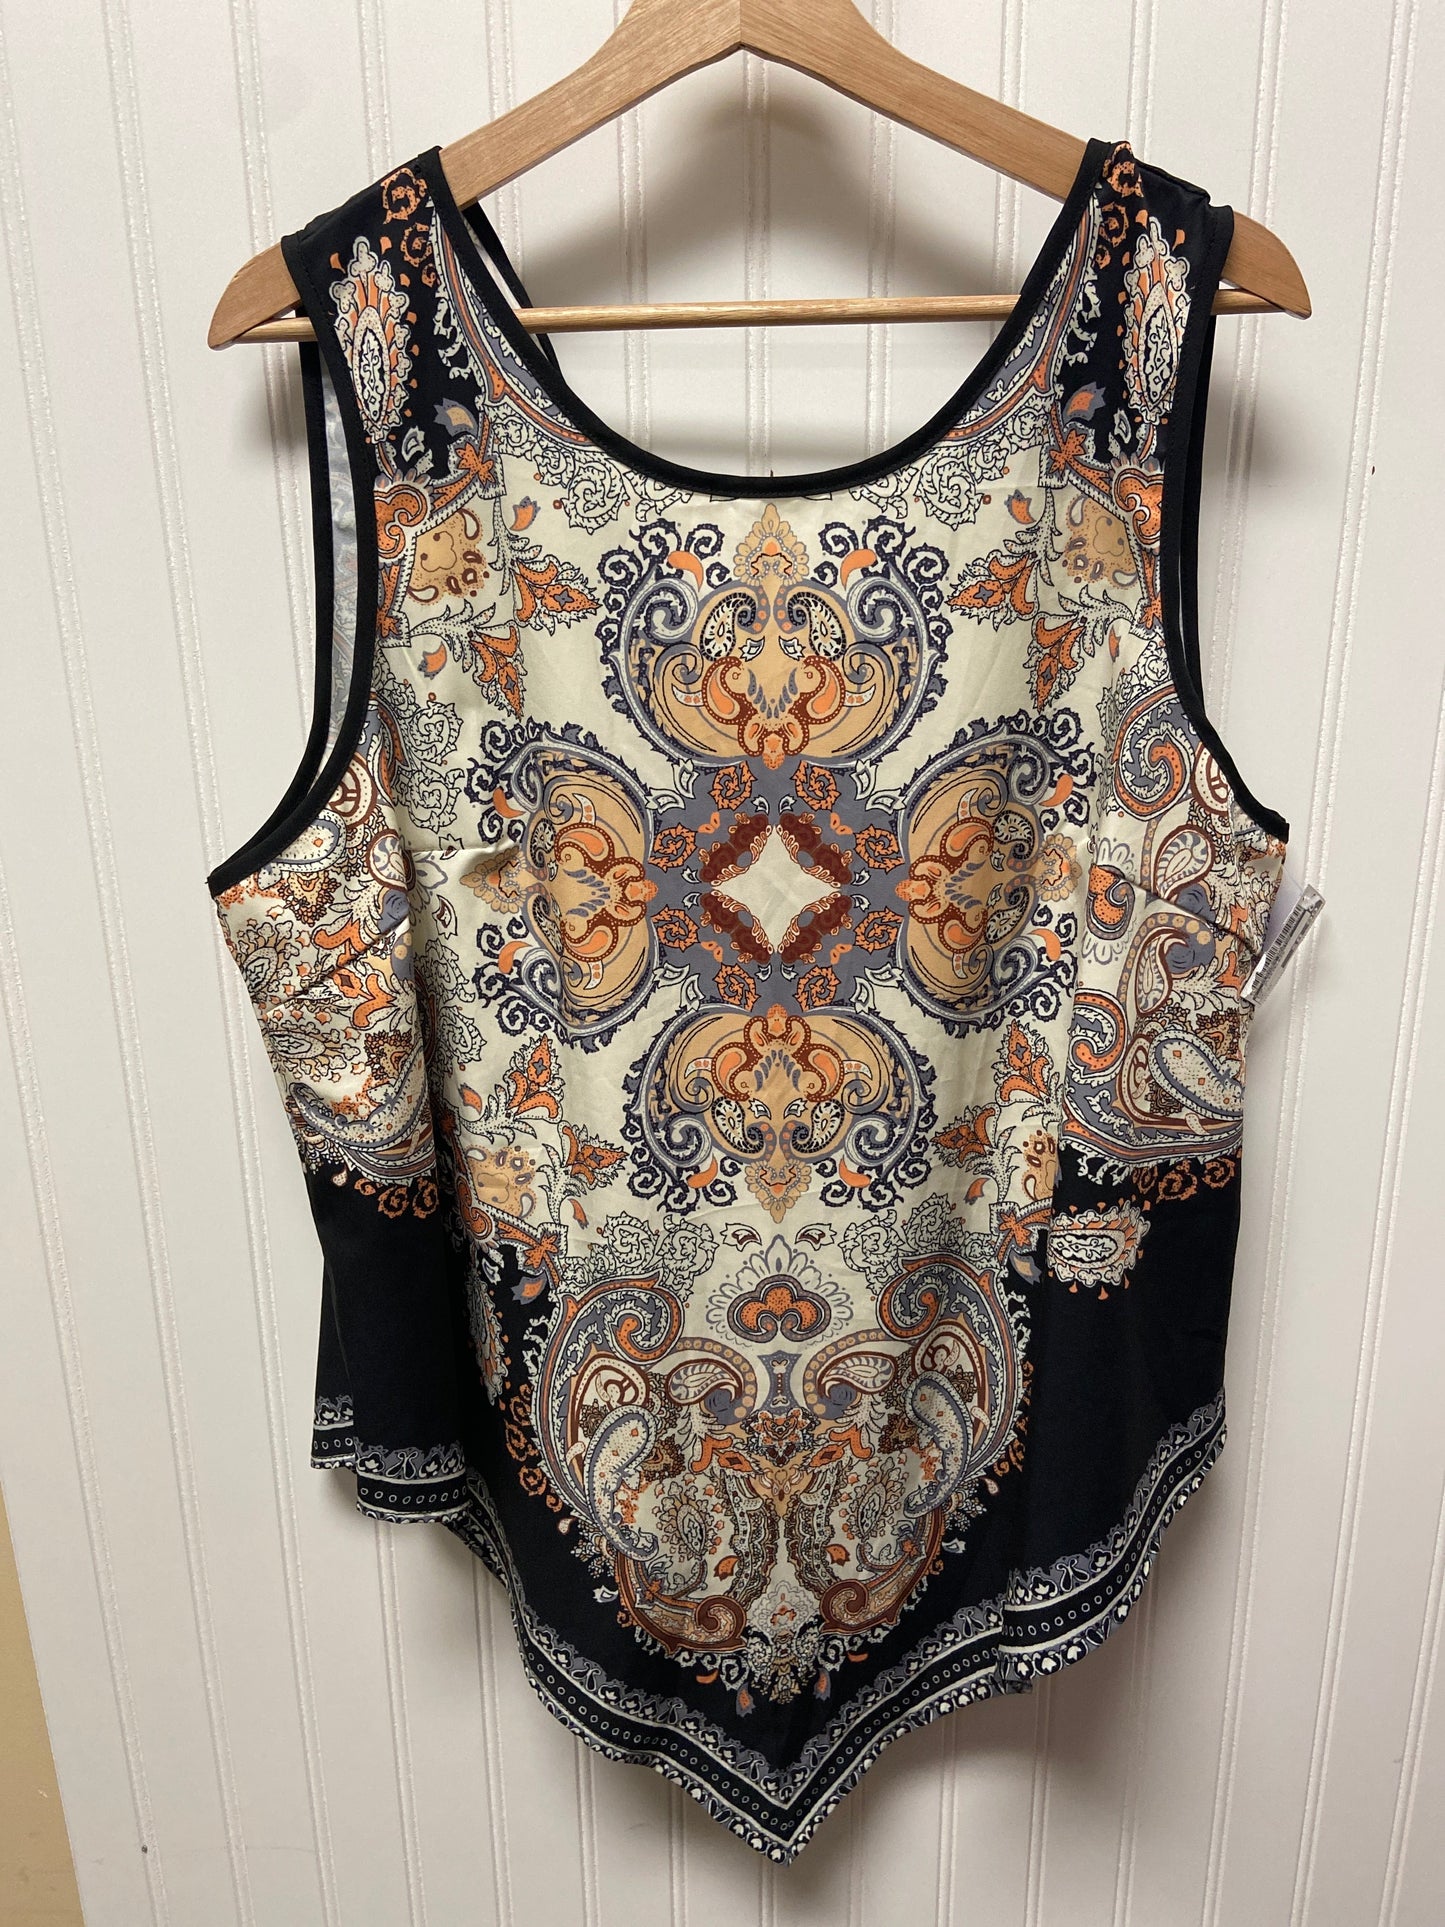 Multi-colored Top Sleeveless Clothes Mentor, Size 2x